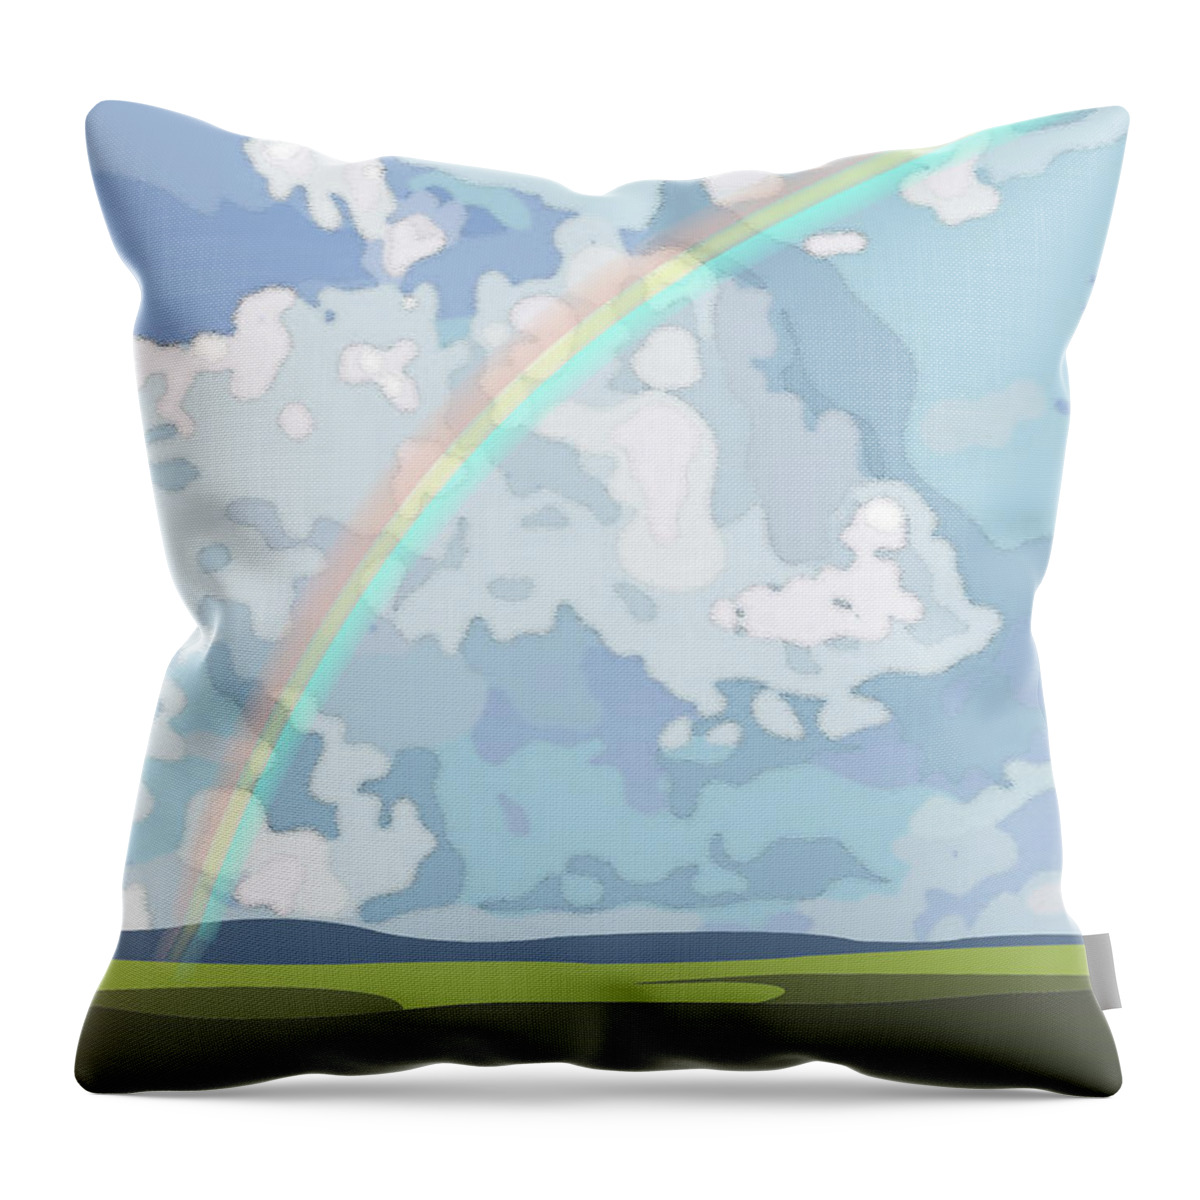 Rainbow Throw Pillow featuring the painting Rainbow by Susan Spangler